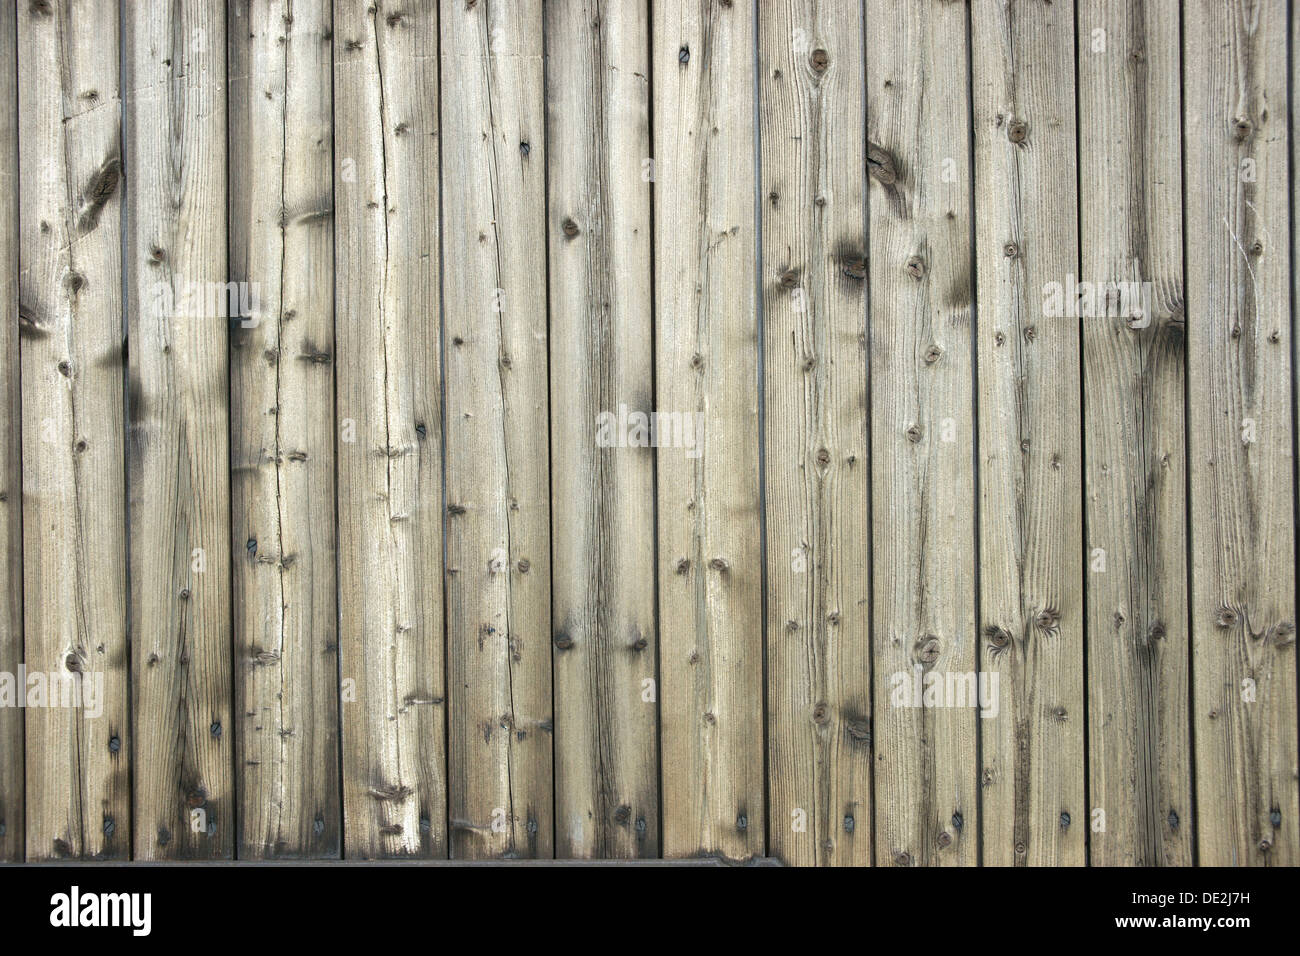 Faded wooden wall of planed boards Stock Photo